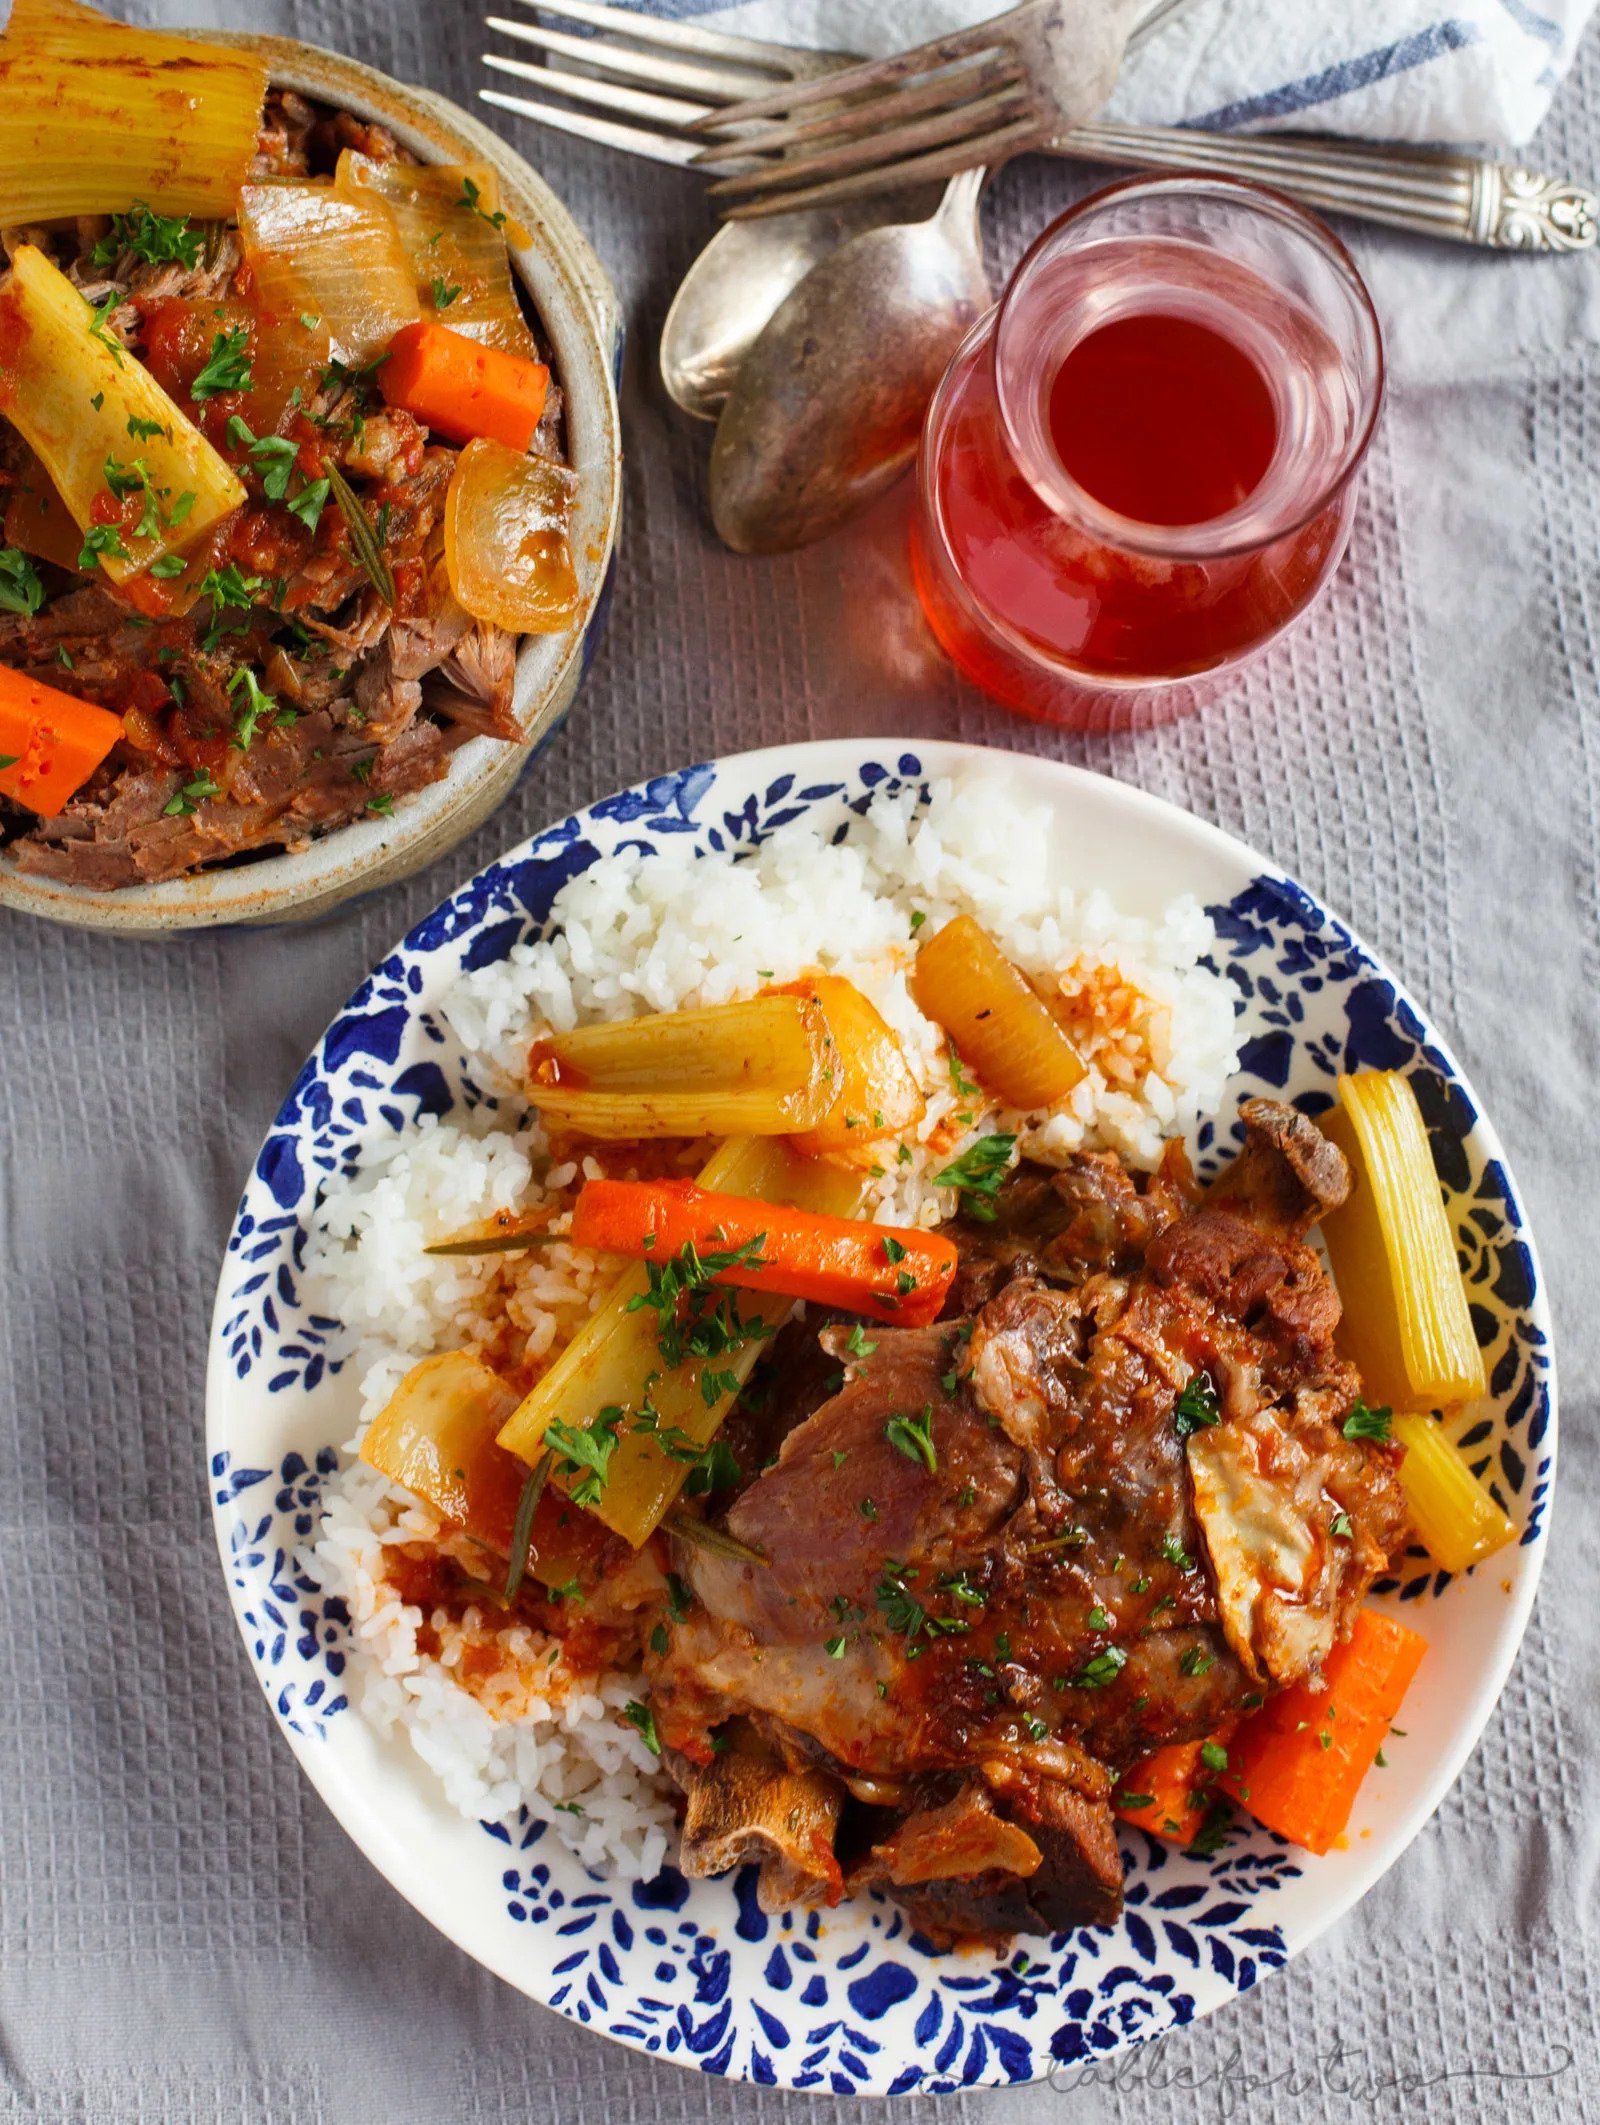 https://hips.hearstapps.com/hmg-prod/images/crockpot-recipes-for-two-slow-cooker-osso-buco-1641940348.jpg